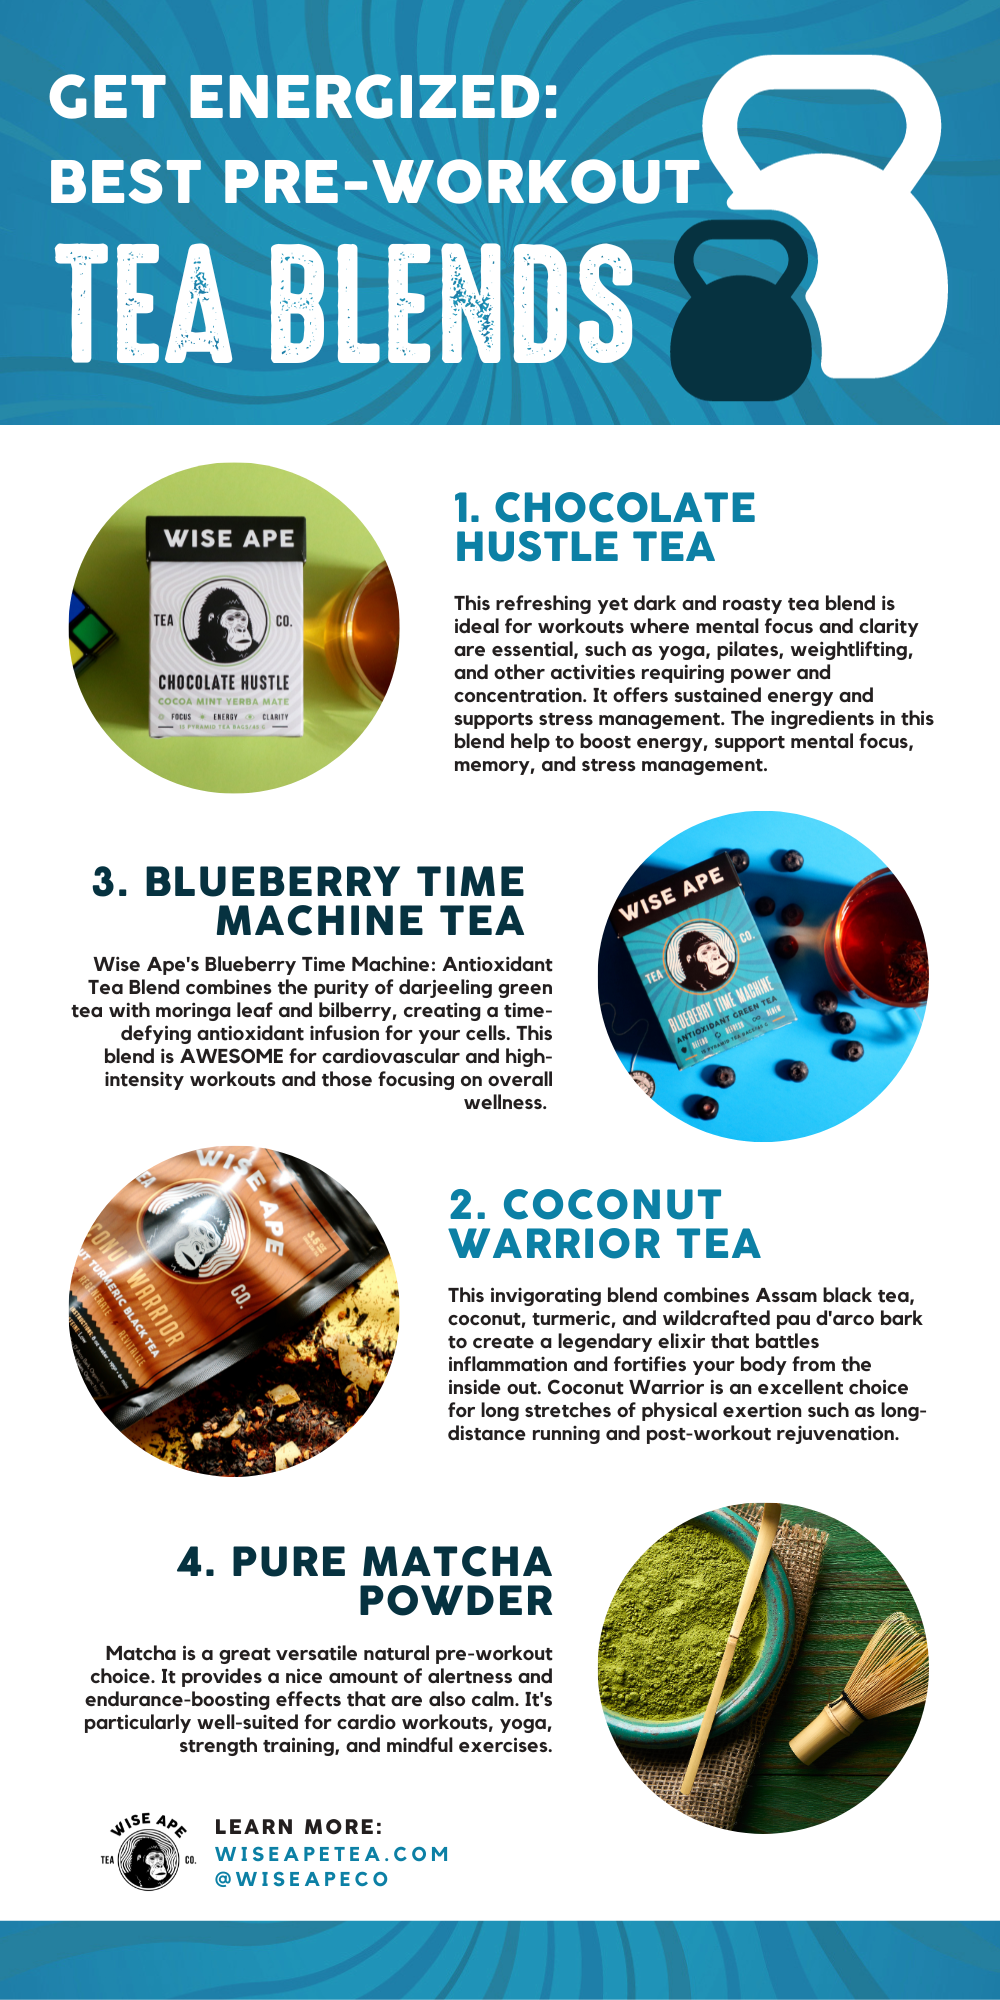 Enhance Your Workouts with Tea: The 6 Best Natural Pre-Workout Tea Blends